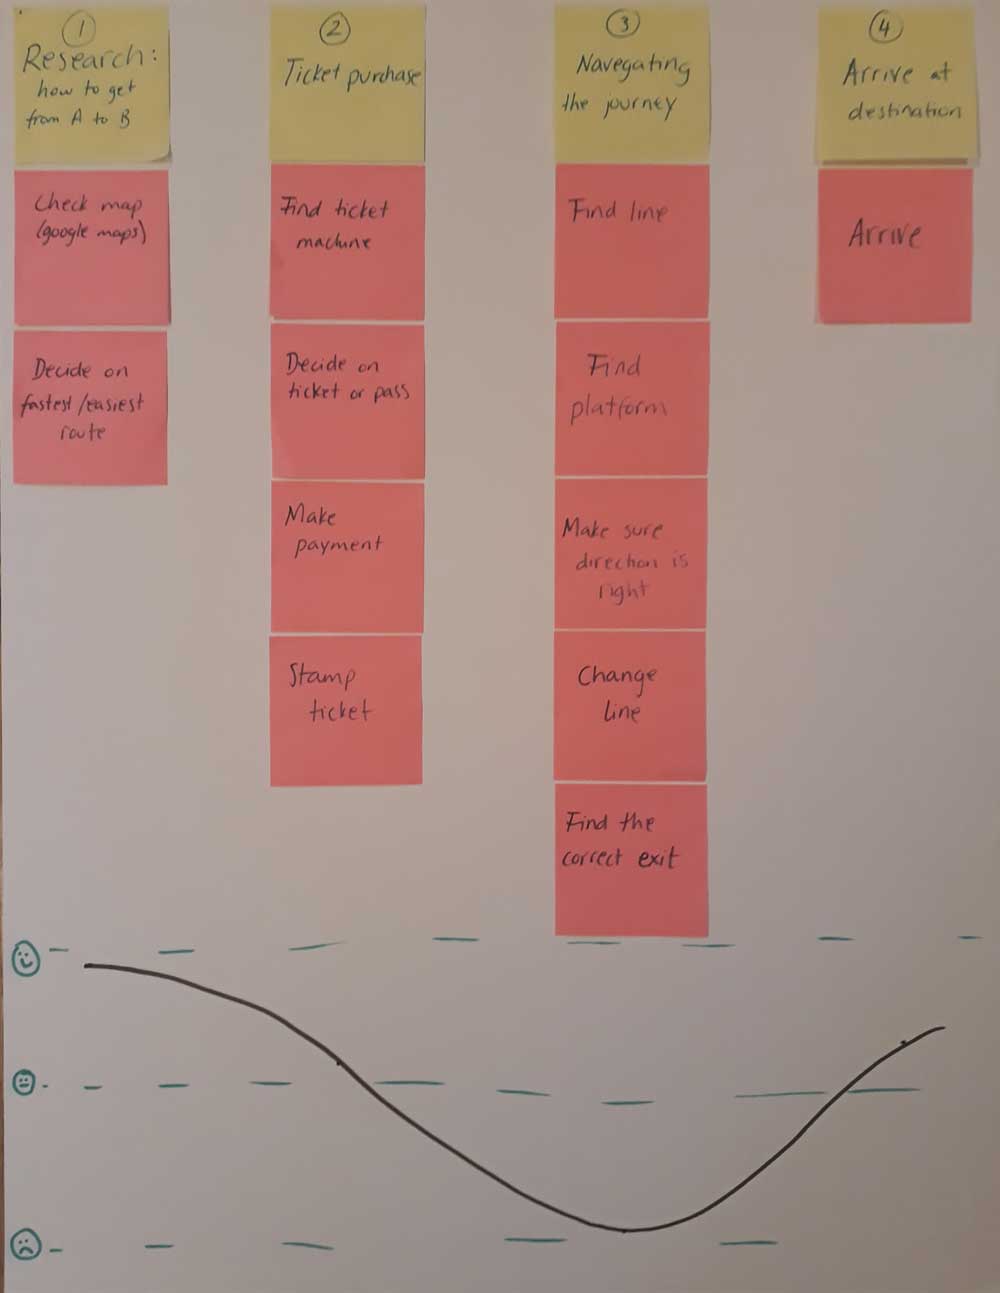 Journey map of a user's experience.